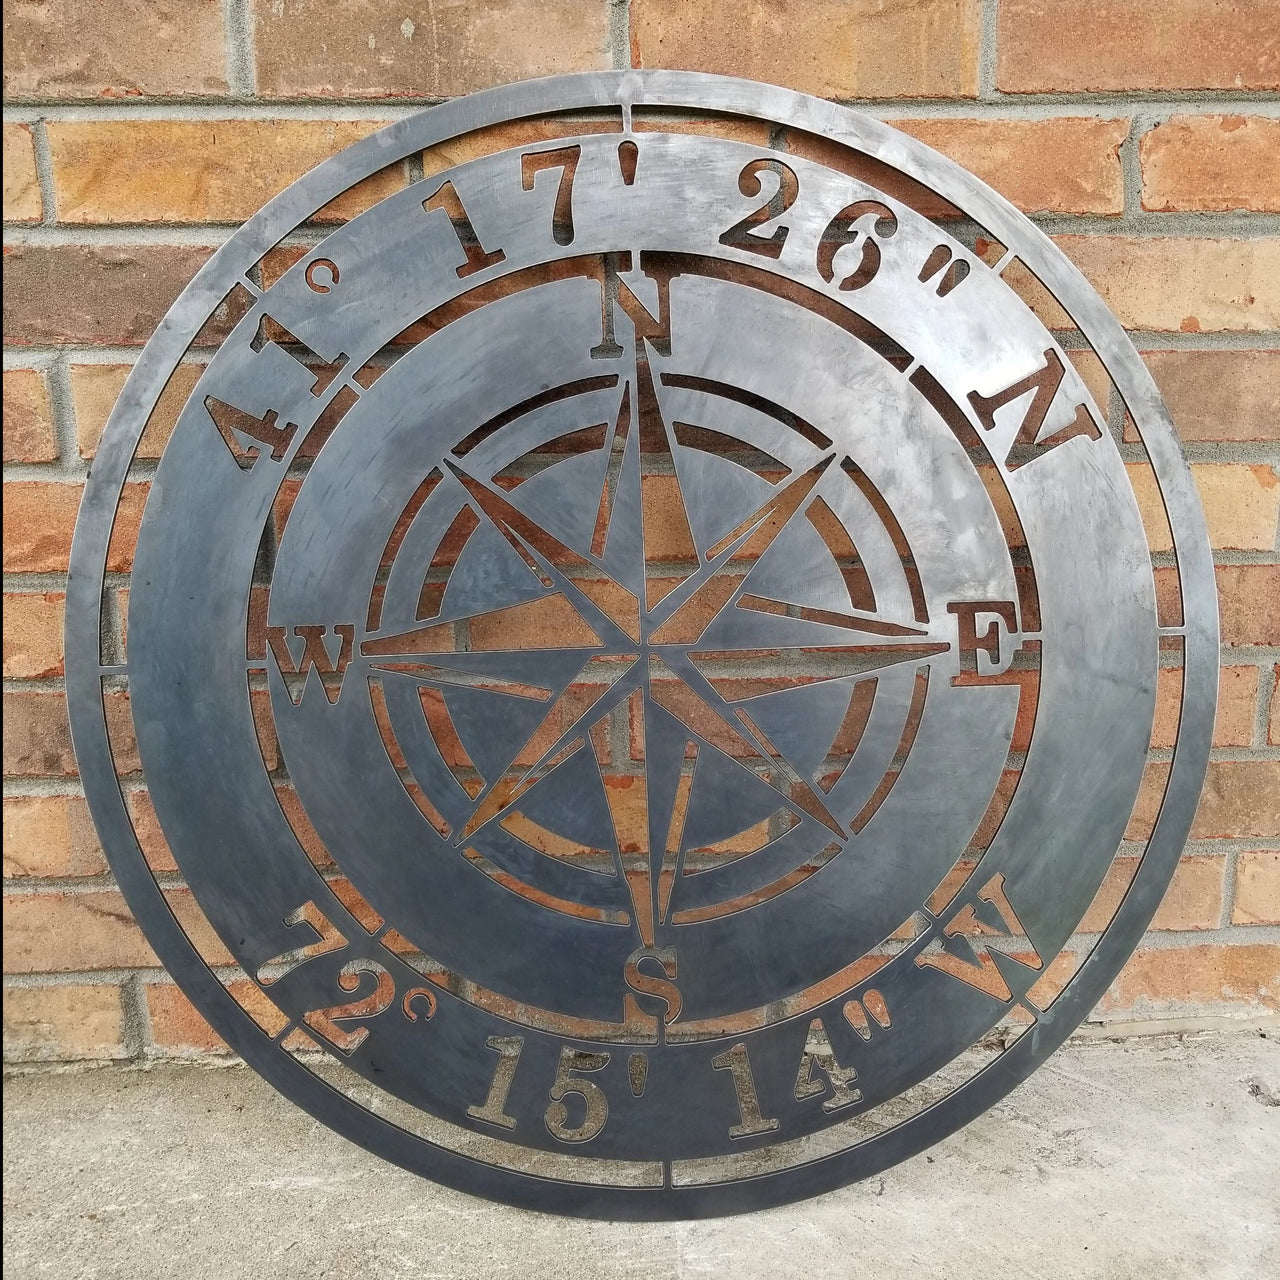 Metal Compass Rose With Coordinates. The coordinates read, "41 17 26 N 72 15 14 W"